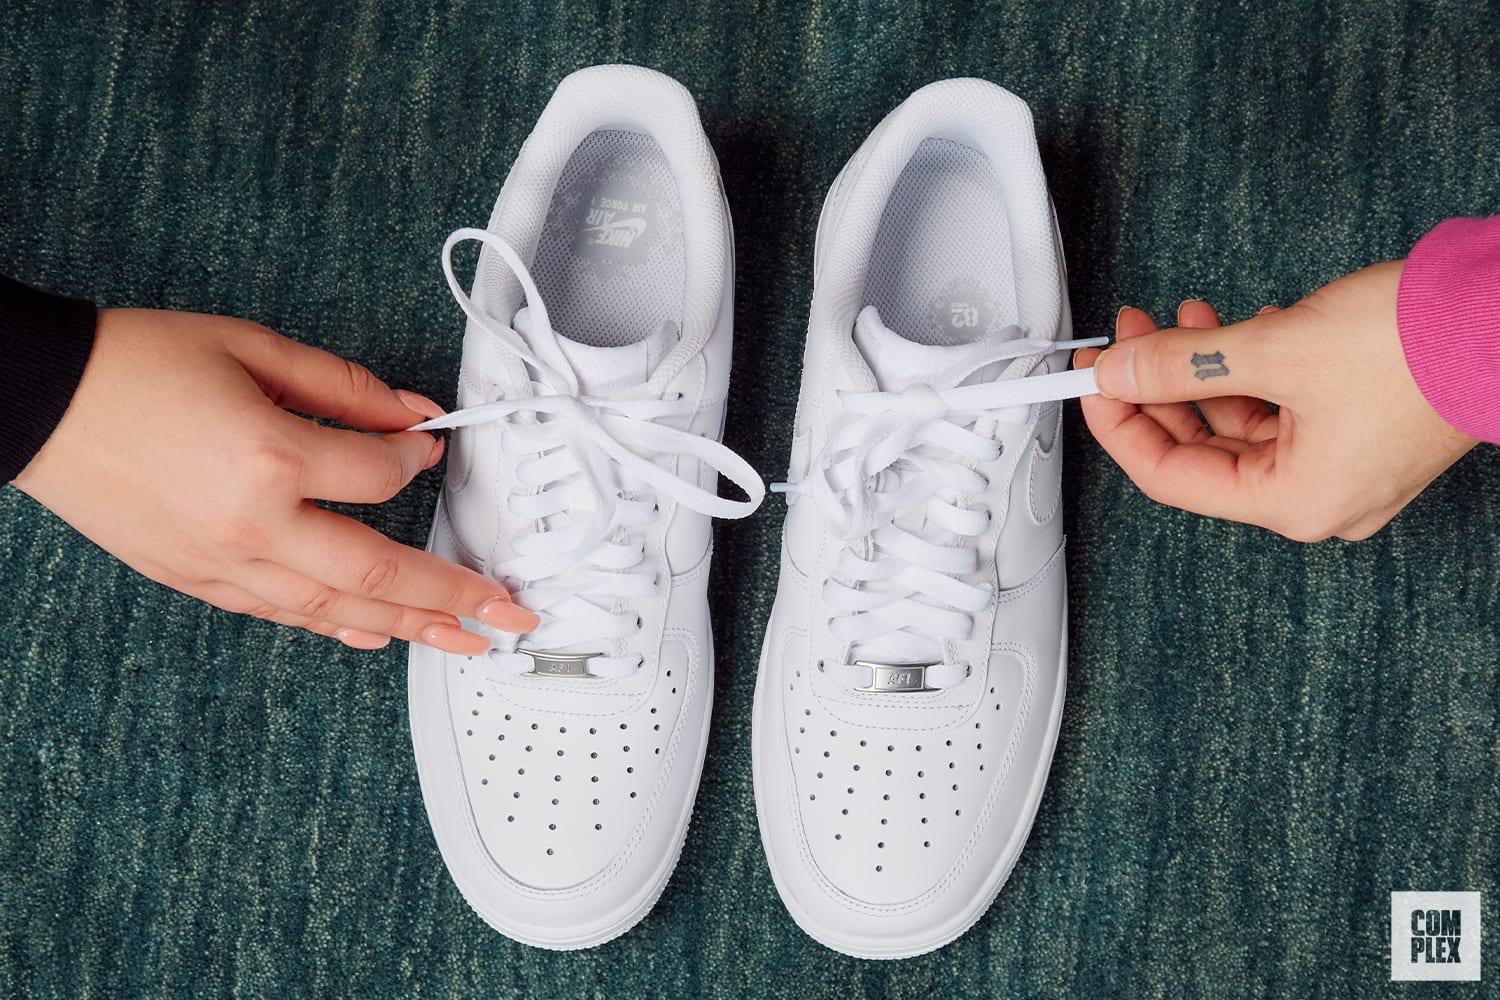 How to Lace Nike Air Force Ones